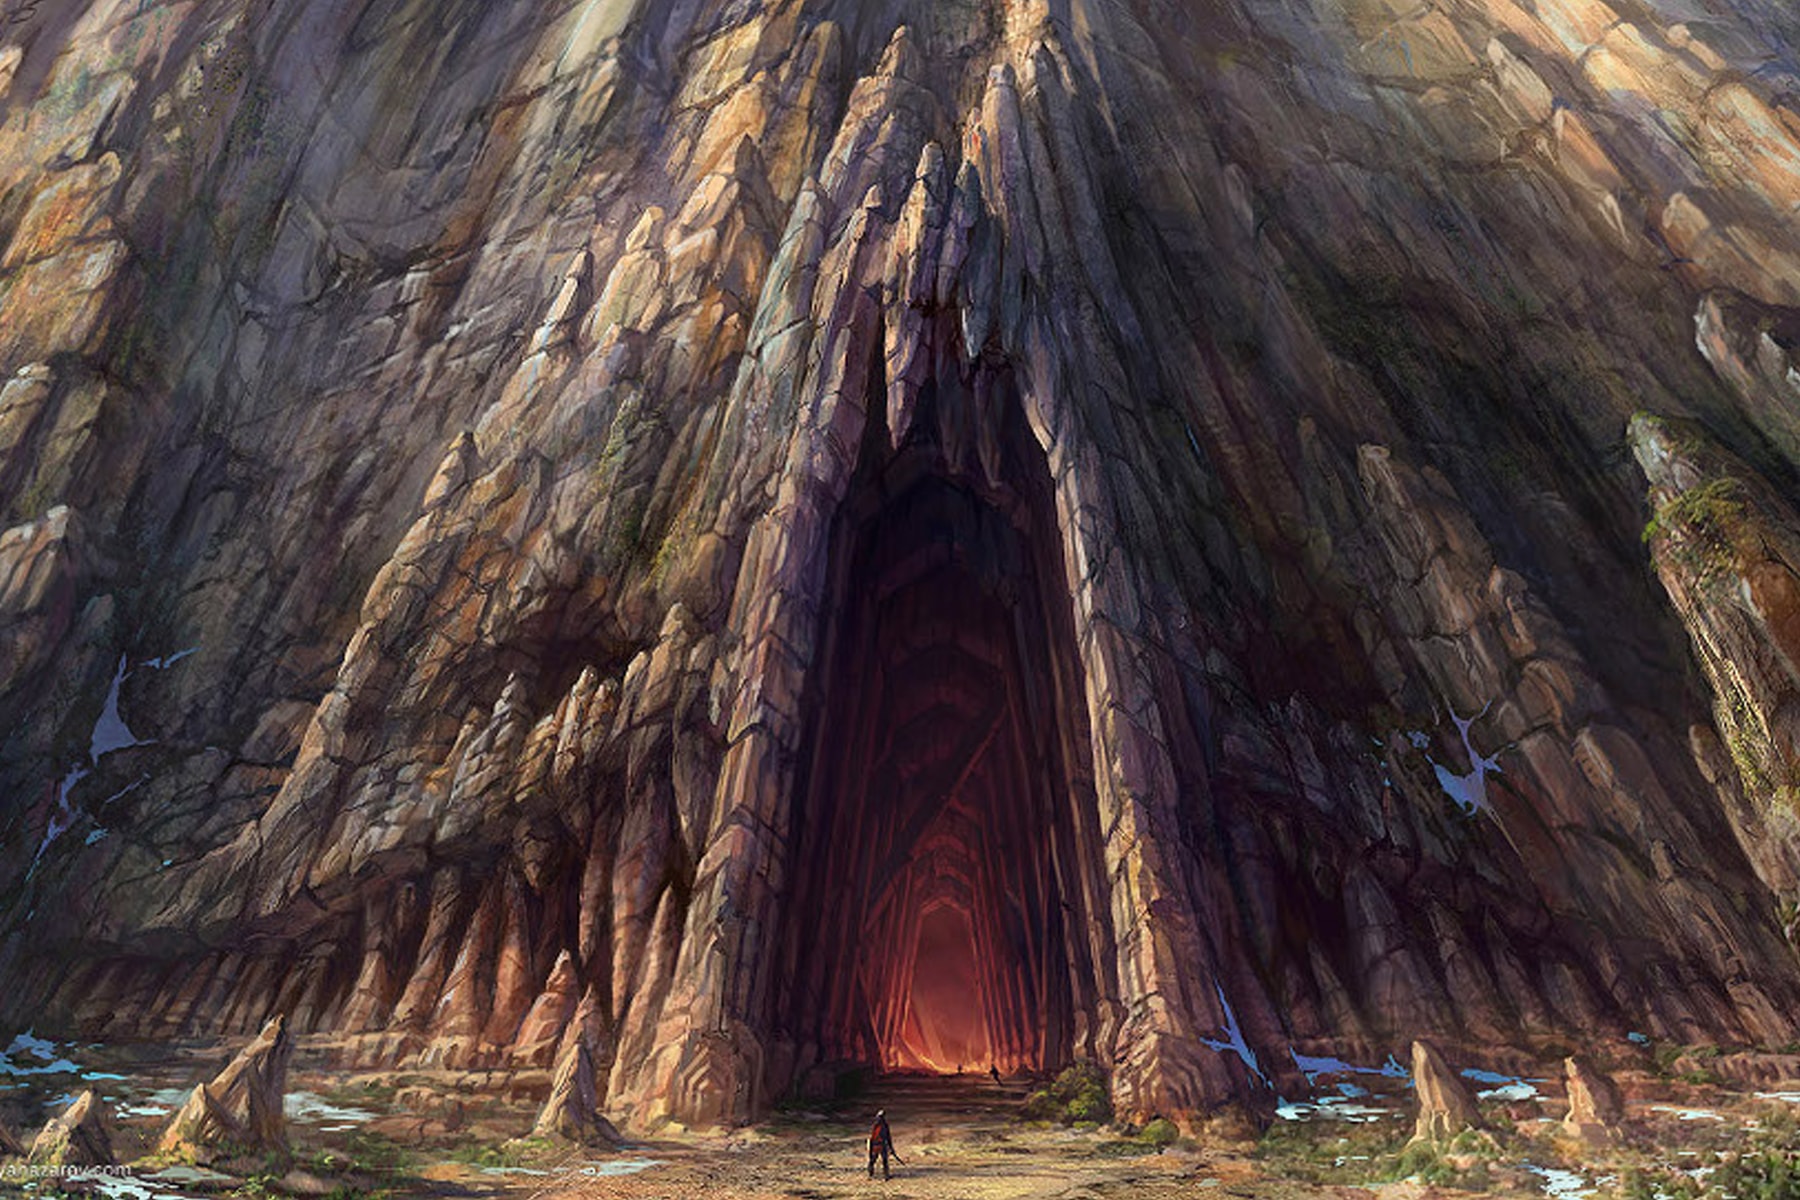 Illustration of the entrance to the dragon's lair in the lord of the rings game, a massive opening in the side of a rock wall